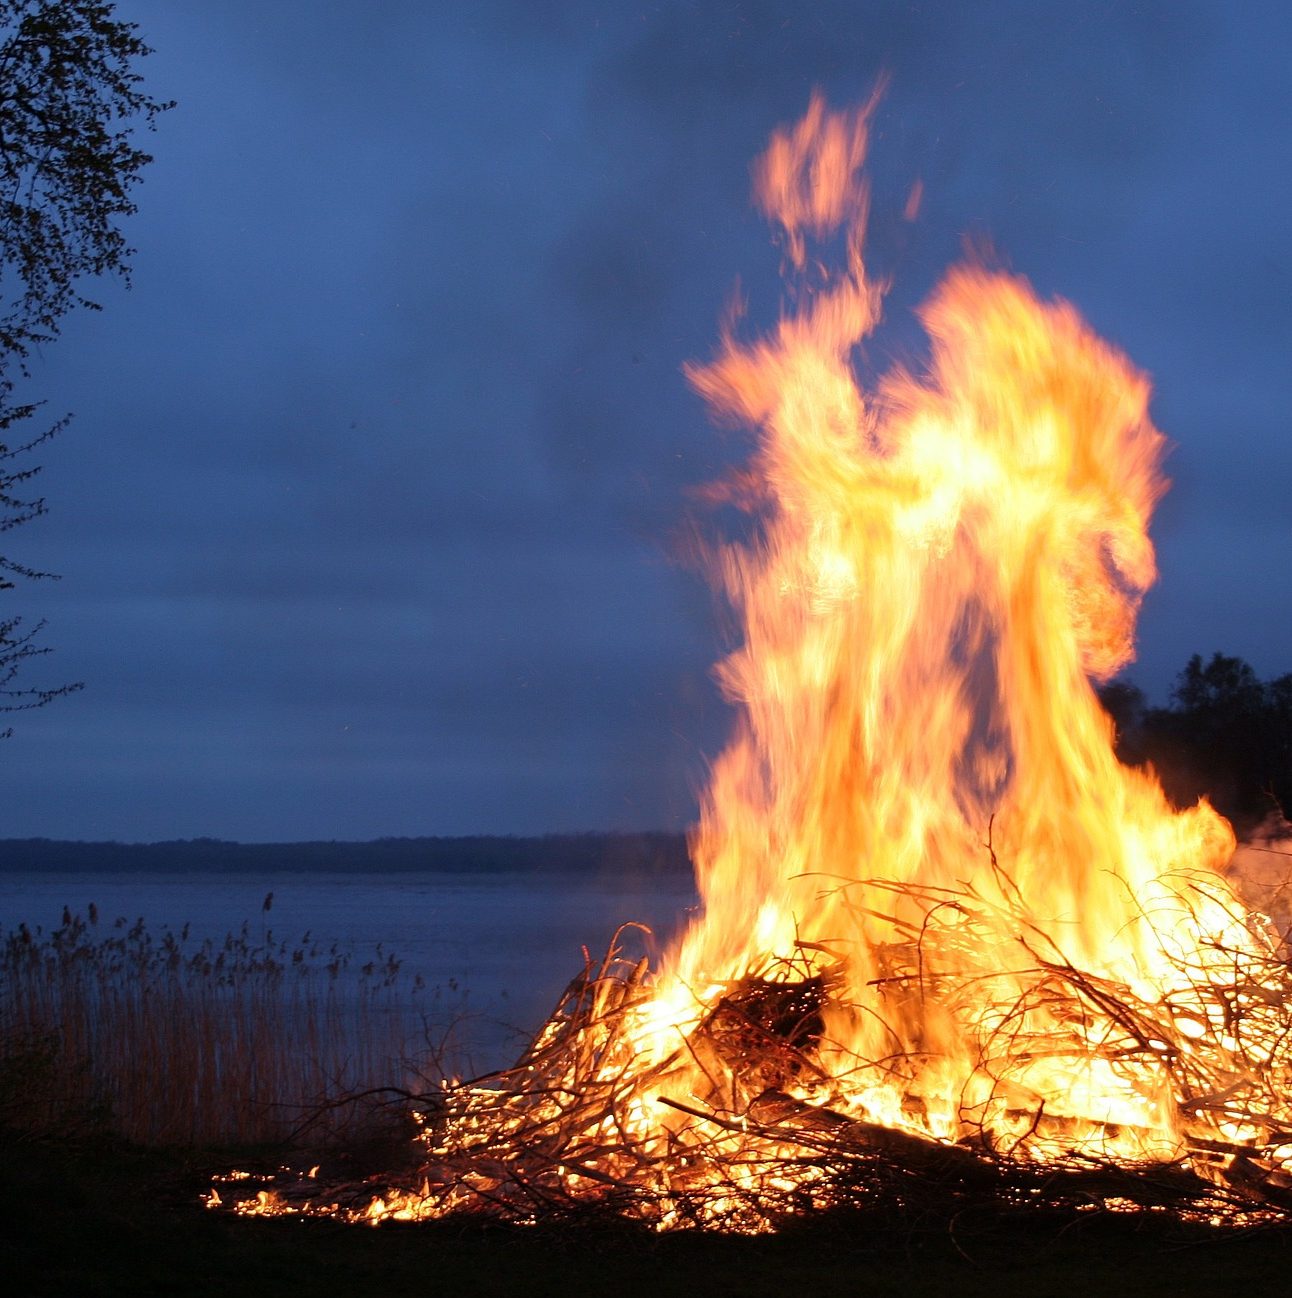 A bonfire alight at night, in front of a lake